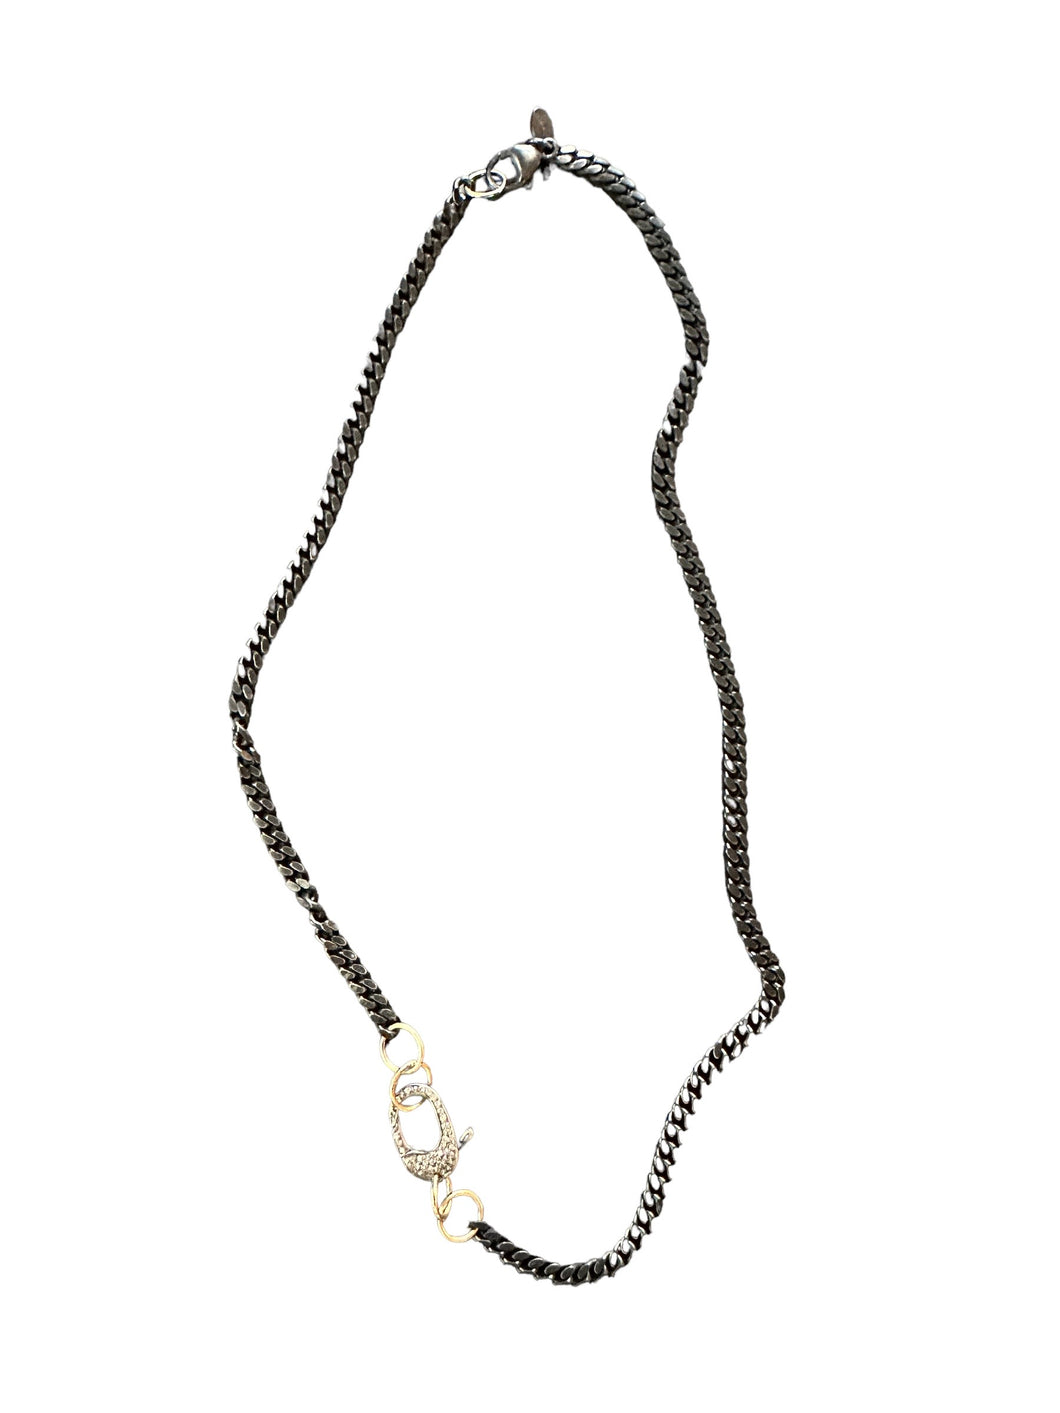 DARK CURB NECKLACE WITH PAVE DIAMOND LOBSTER CLASP